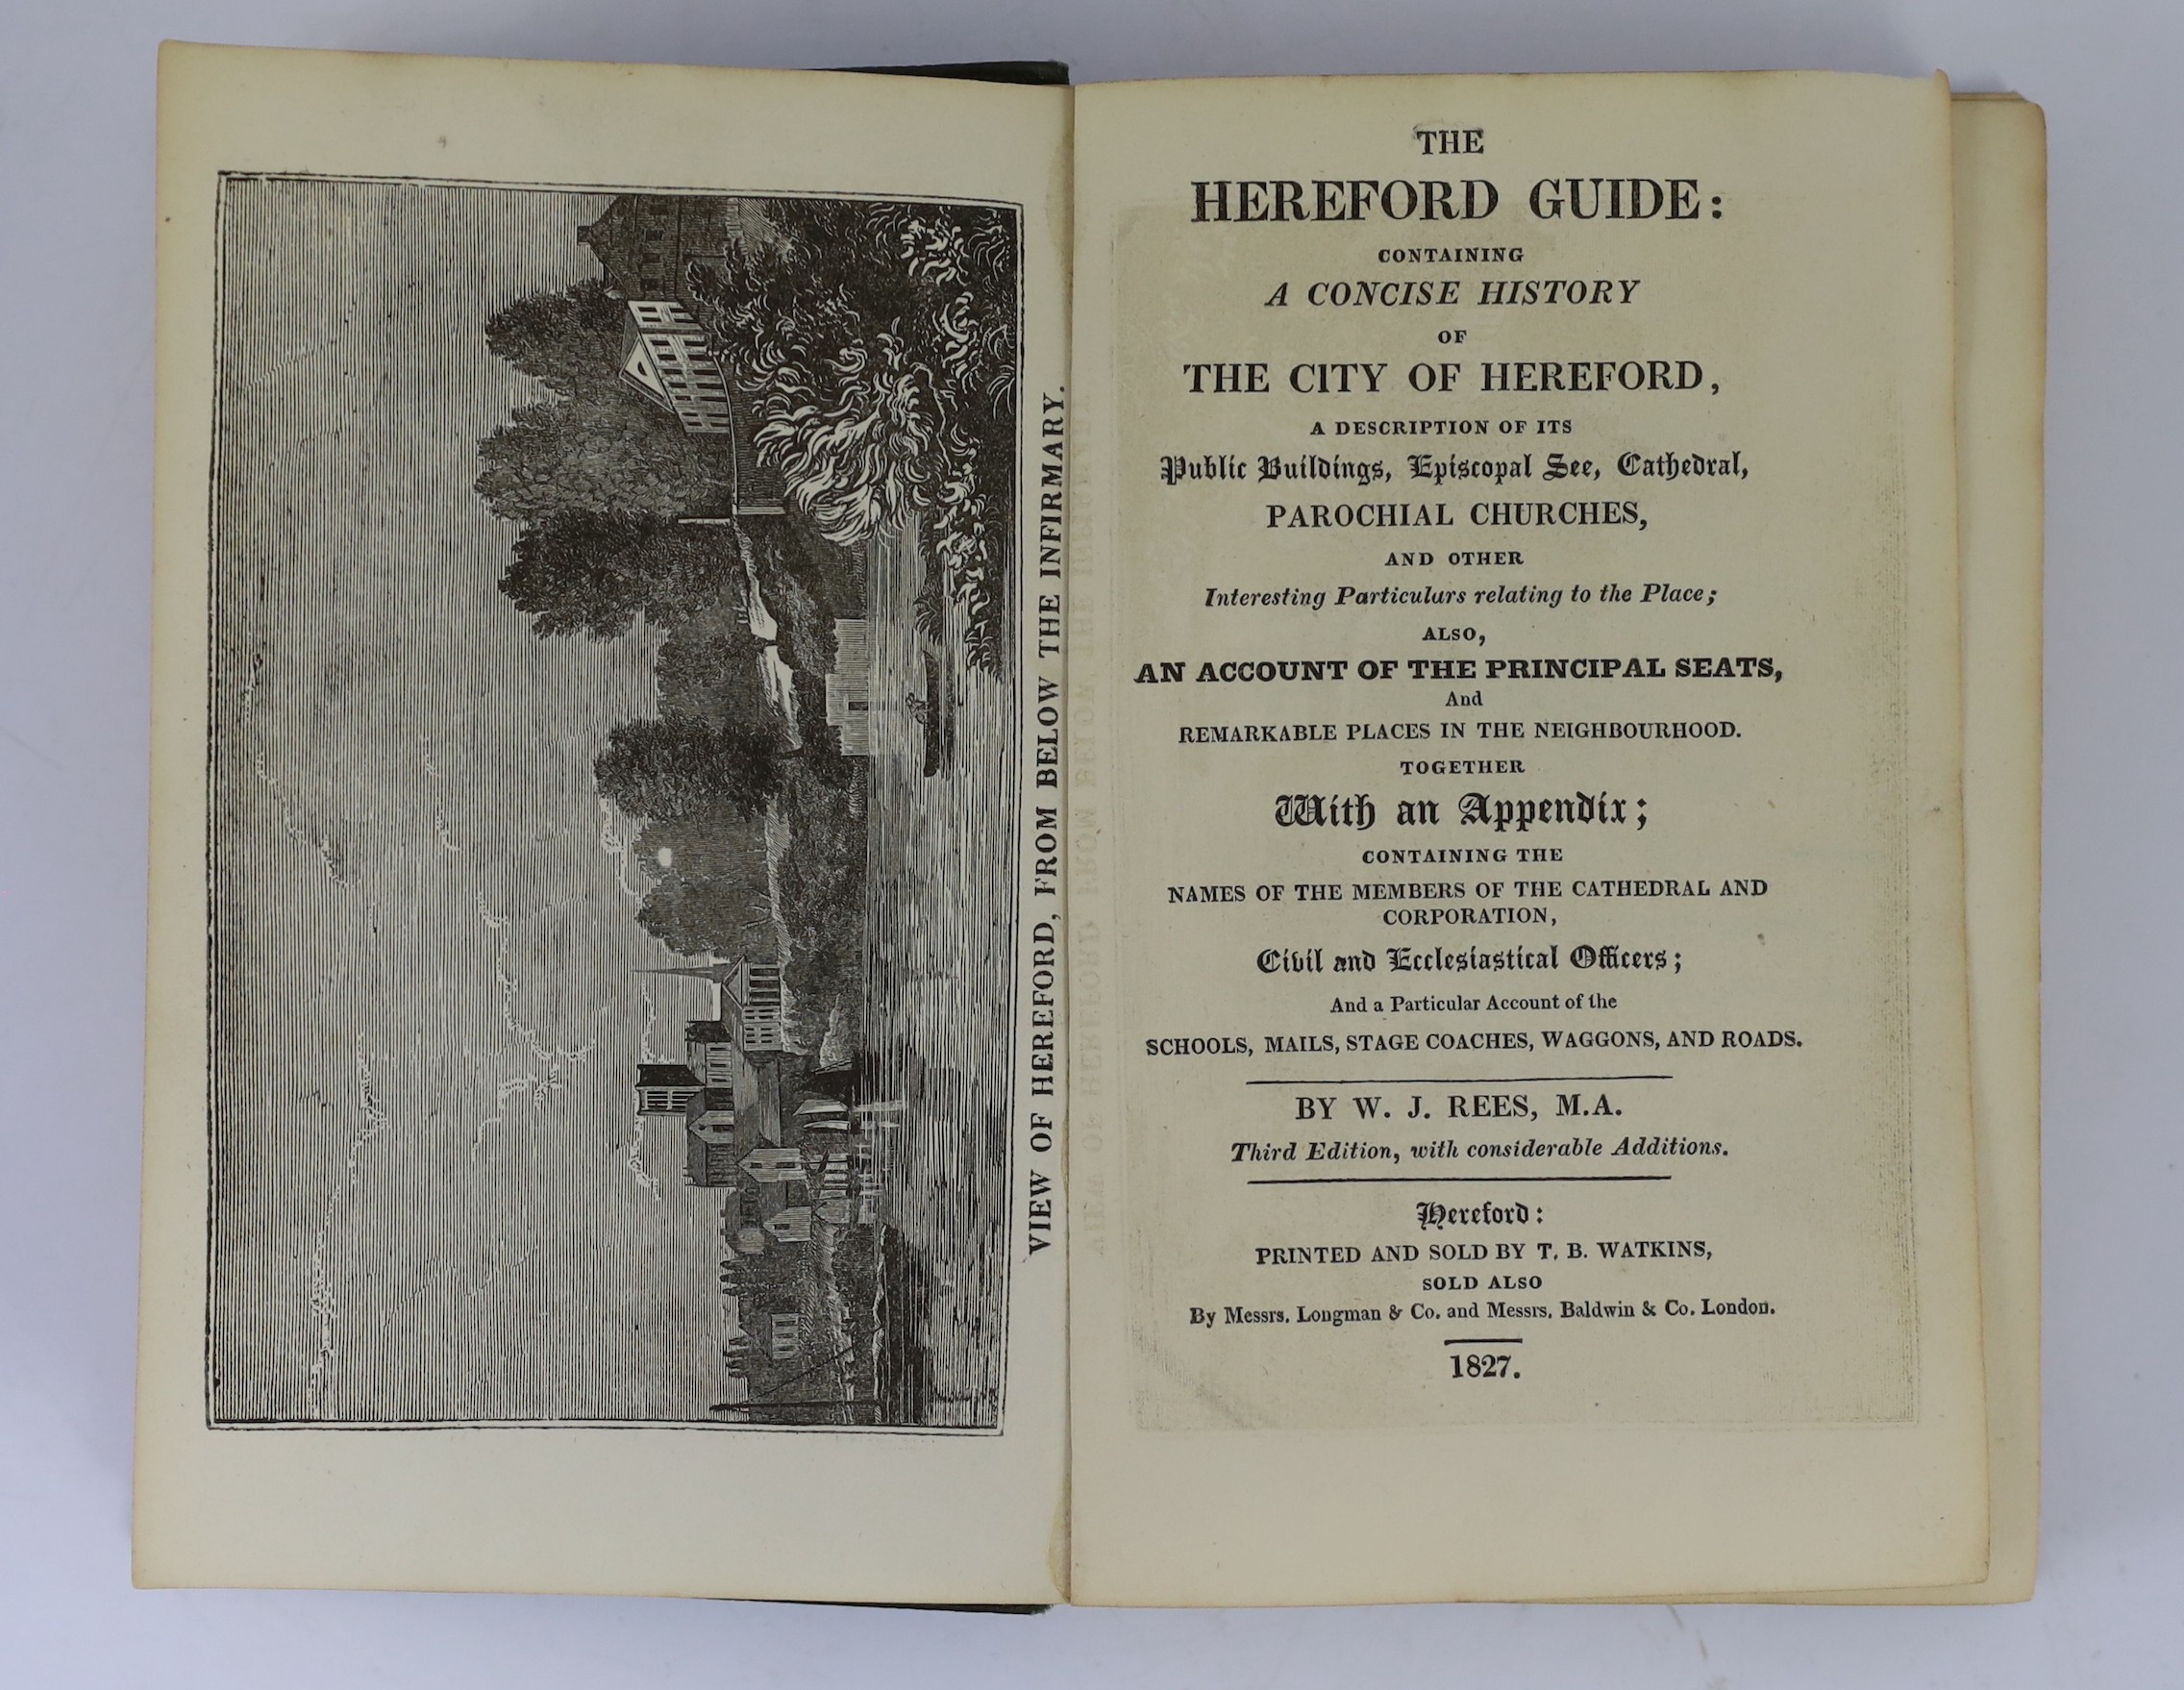 HEREFORDS: The Hereford Guide ... also, an Account of the Principal Seats and Remarkable Places in the Neighbourhood ... rebound cloth-backed paper boards with printed label, uncut